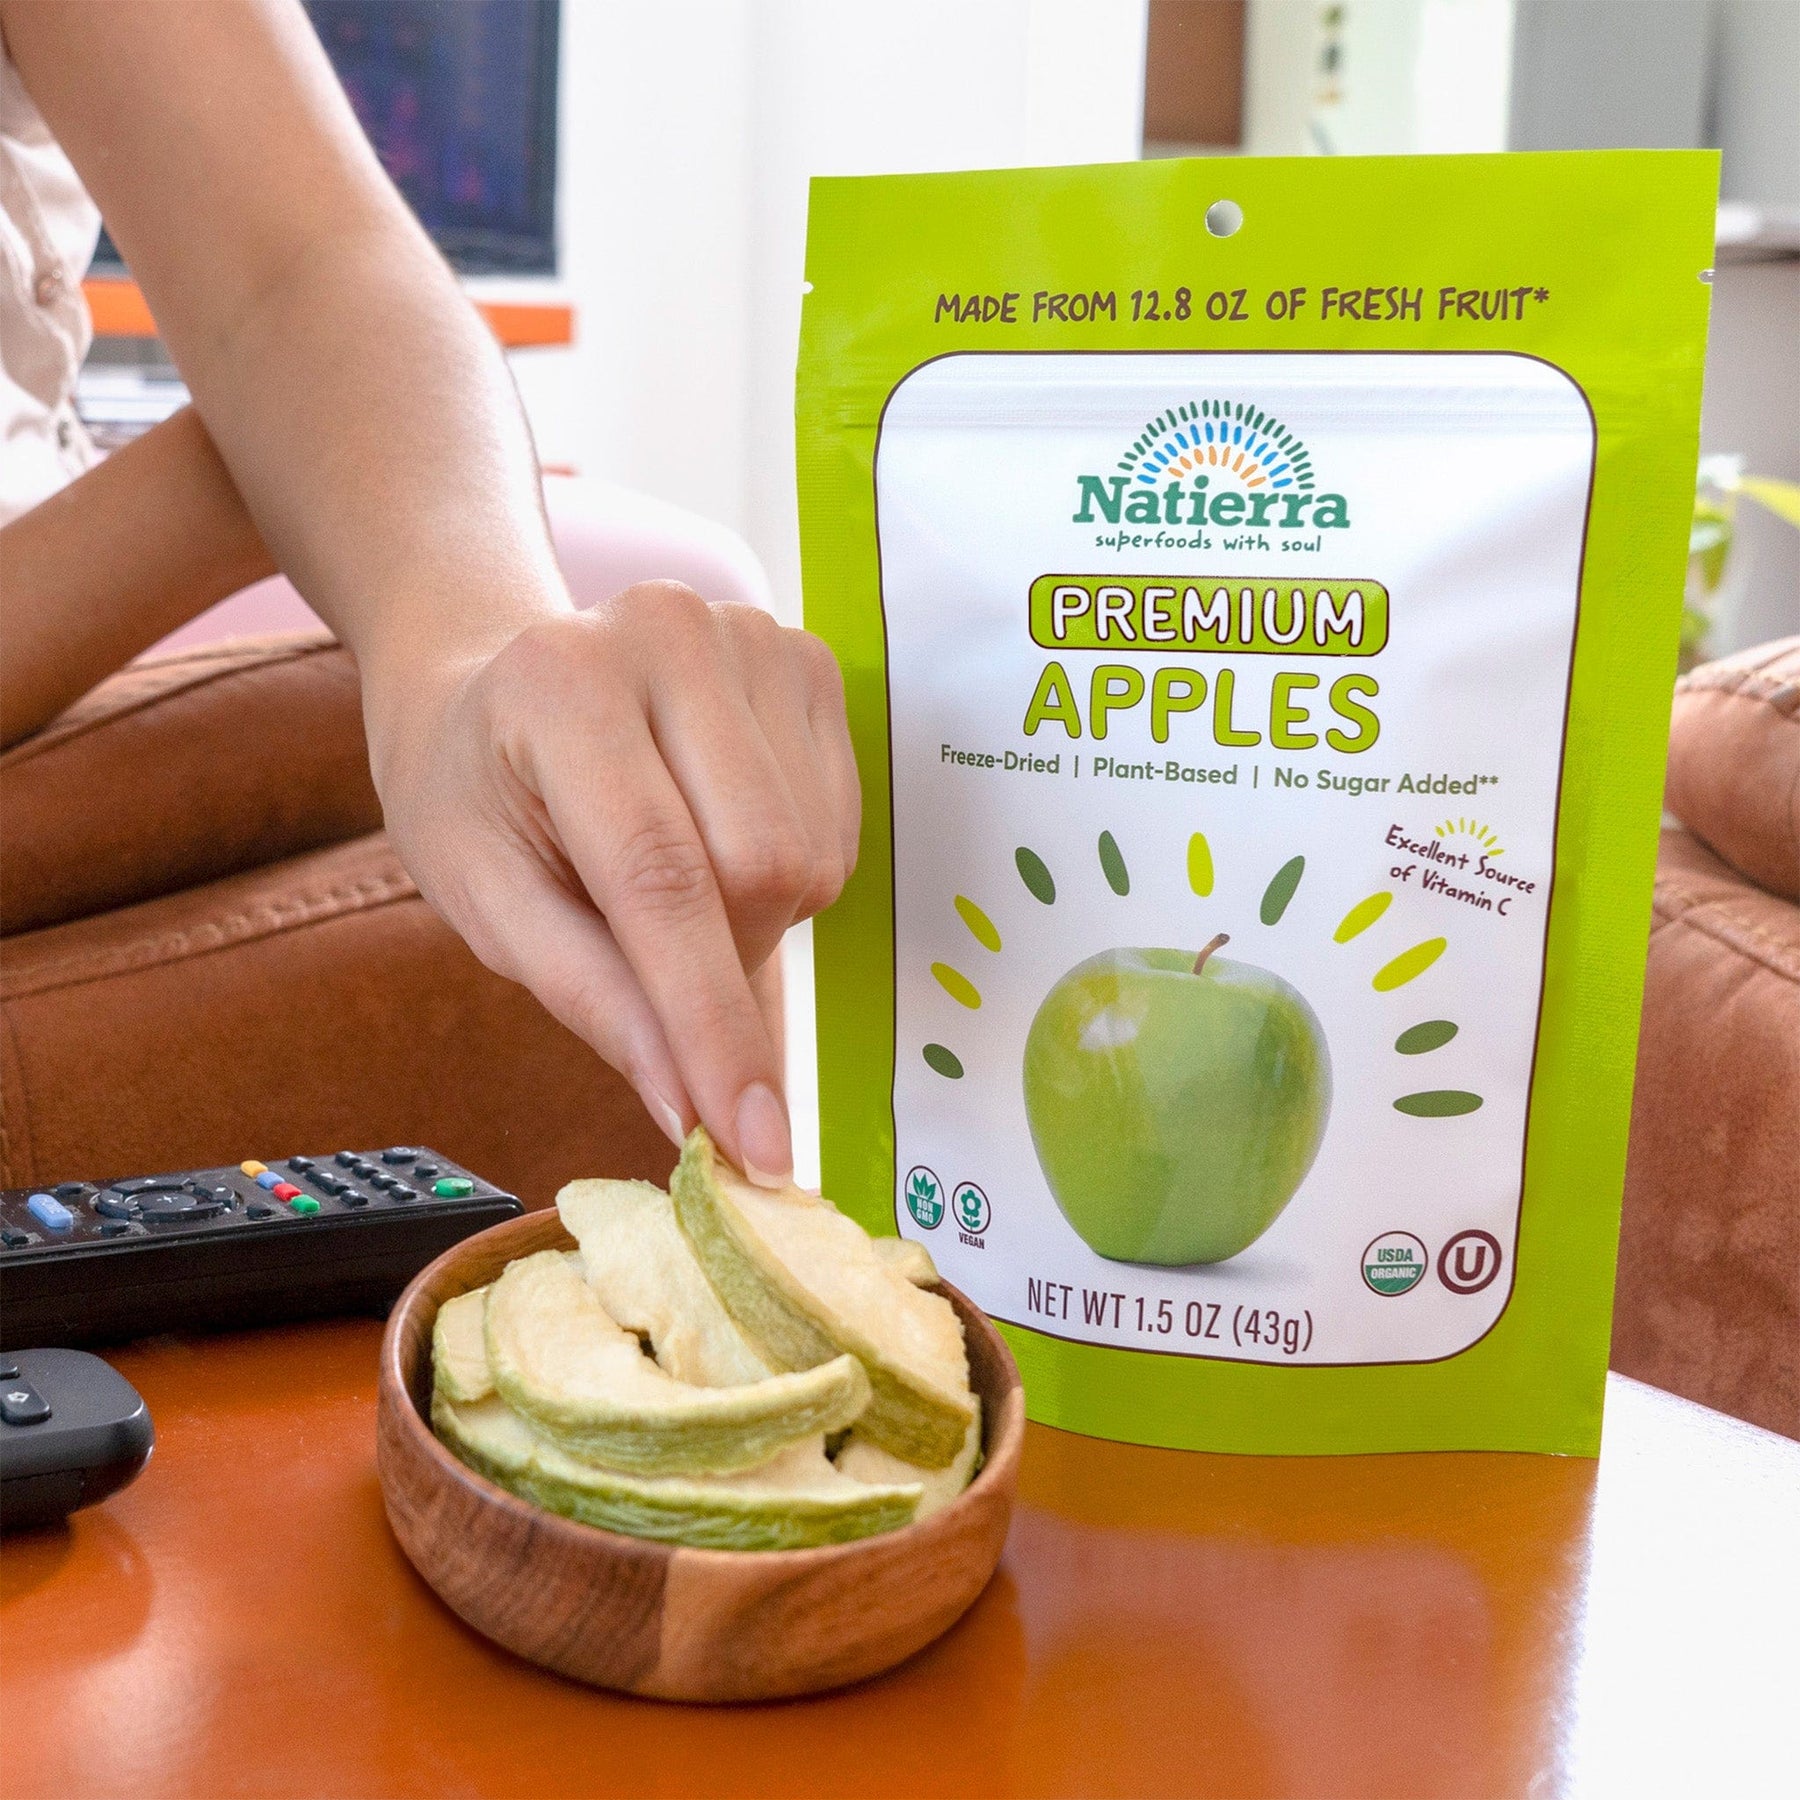 A hand grabbing apple slices from a small bowl next to a bag of Natierra Premium Freeze-Dried Apples